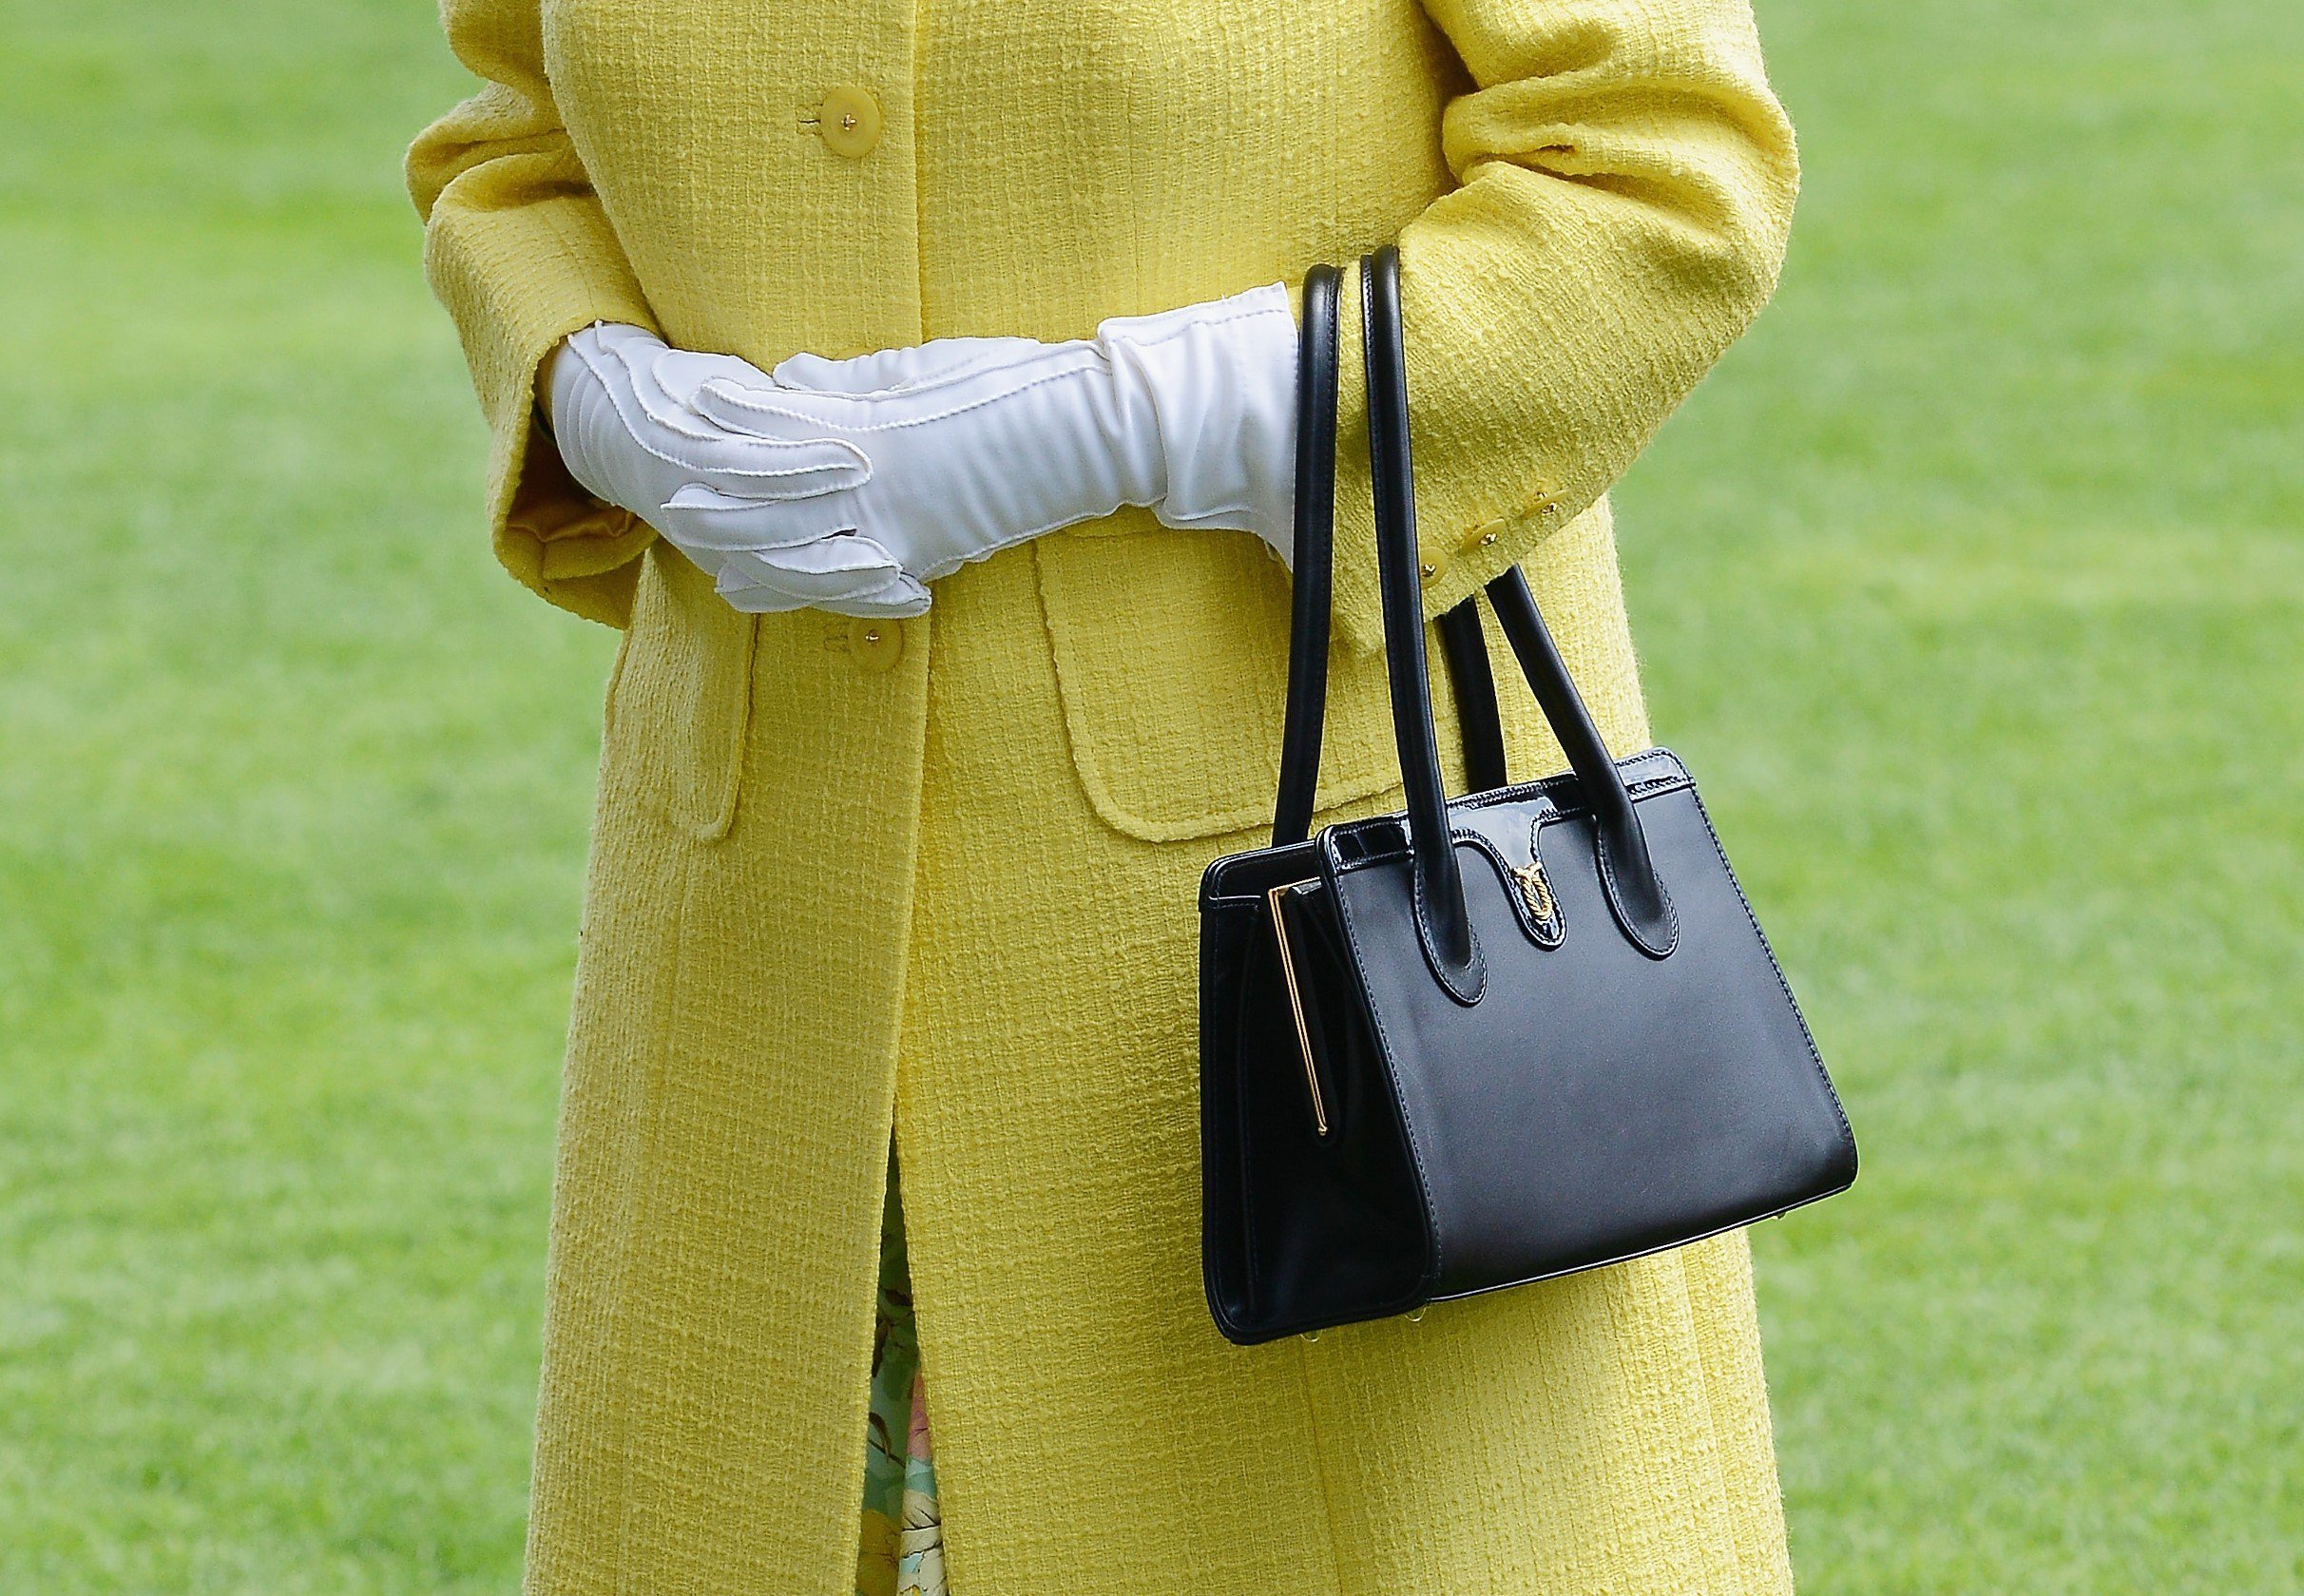 How Does the Queen Use Her Purse? 3 Ways She Sends Secret Messages to ...